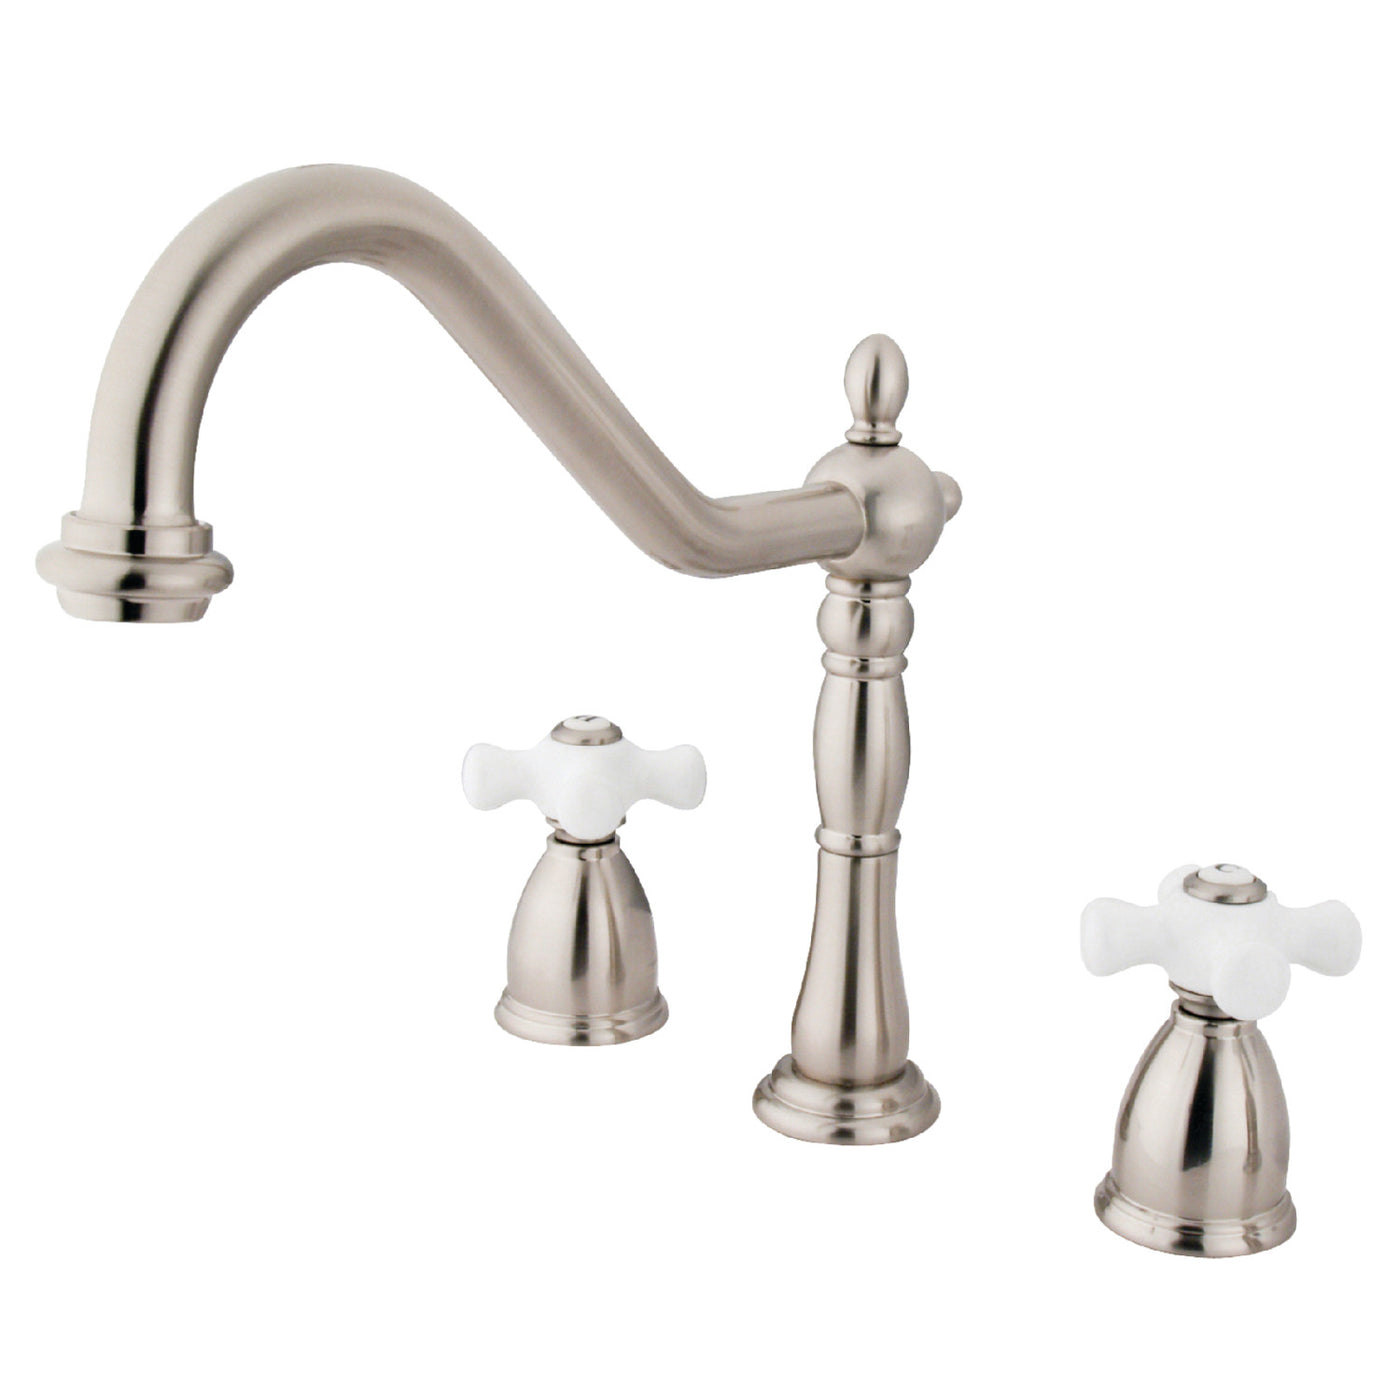 Elements of Design EB1798PXLS Widespread Kitchen Faucet, Brushed Nickel